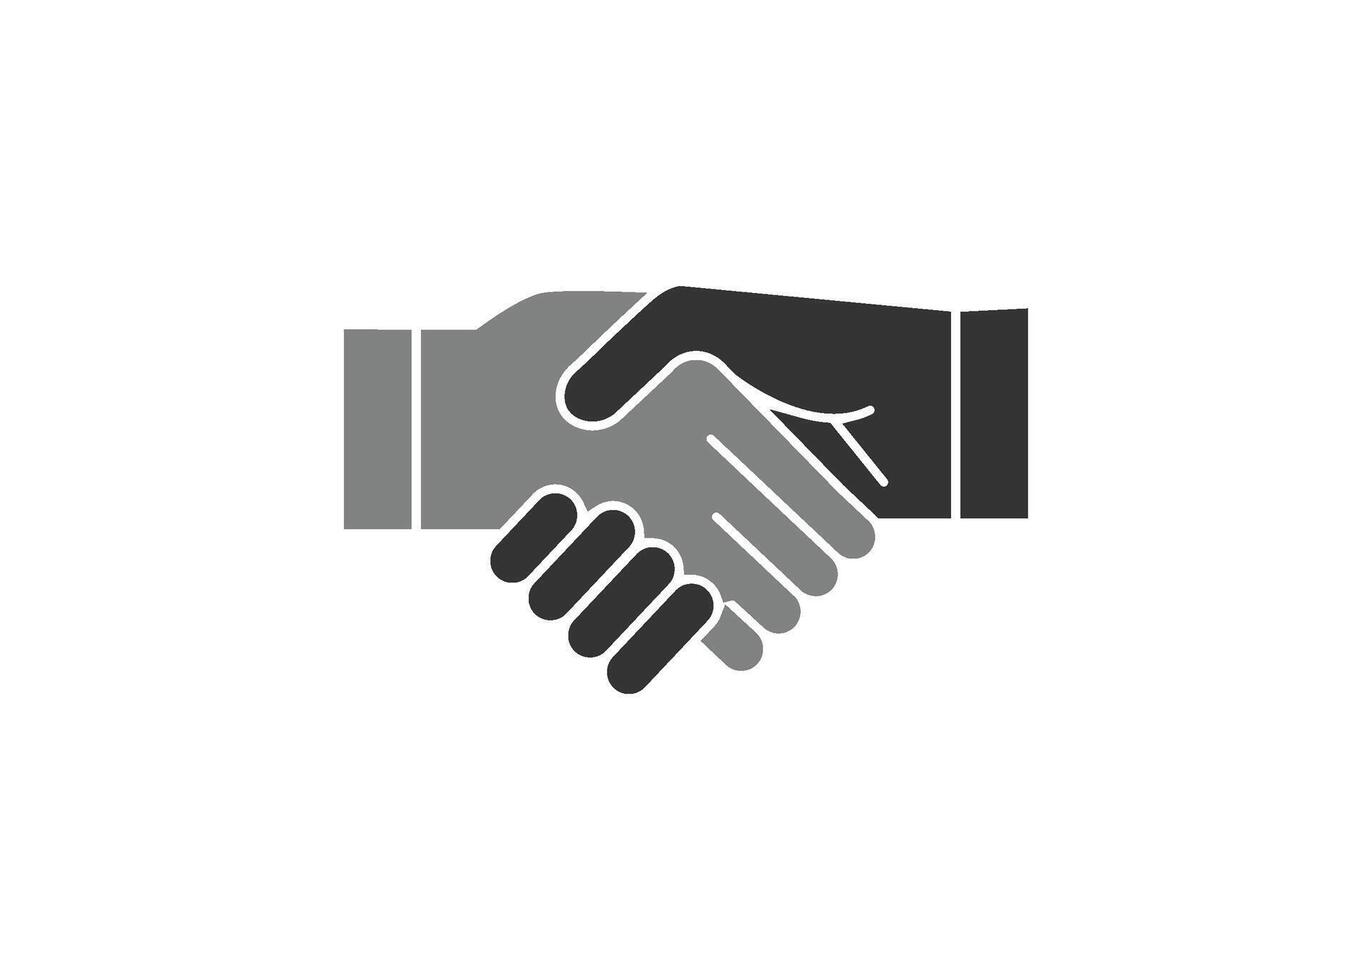 Handshake deal icon line design template isolated vector